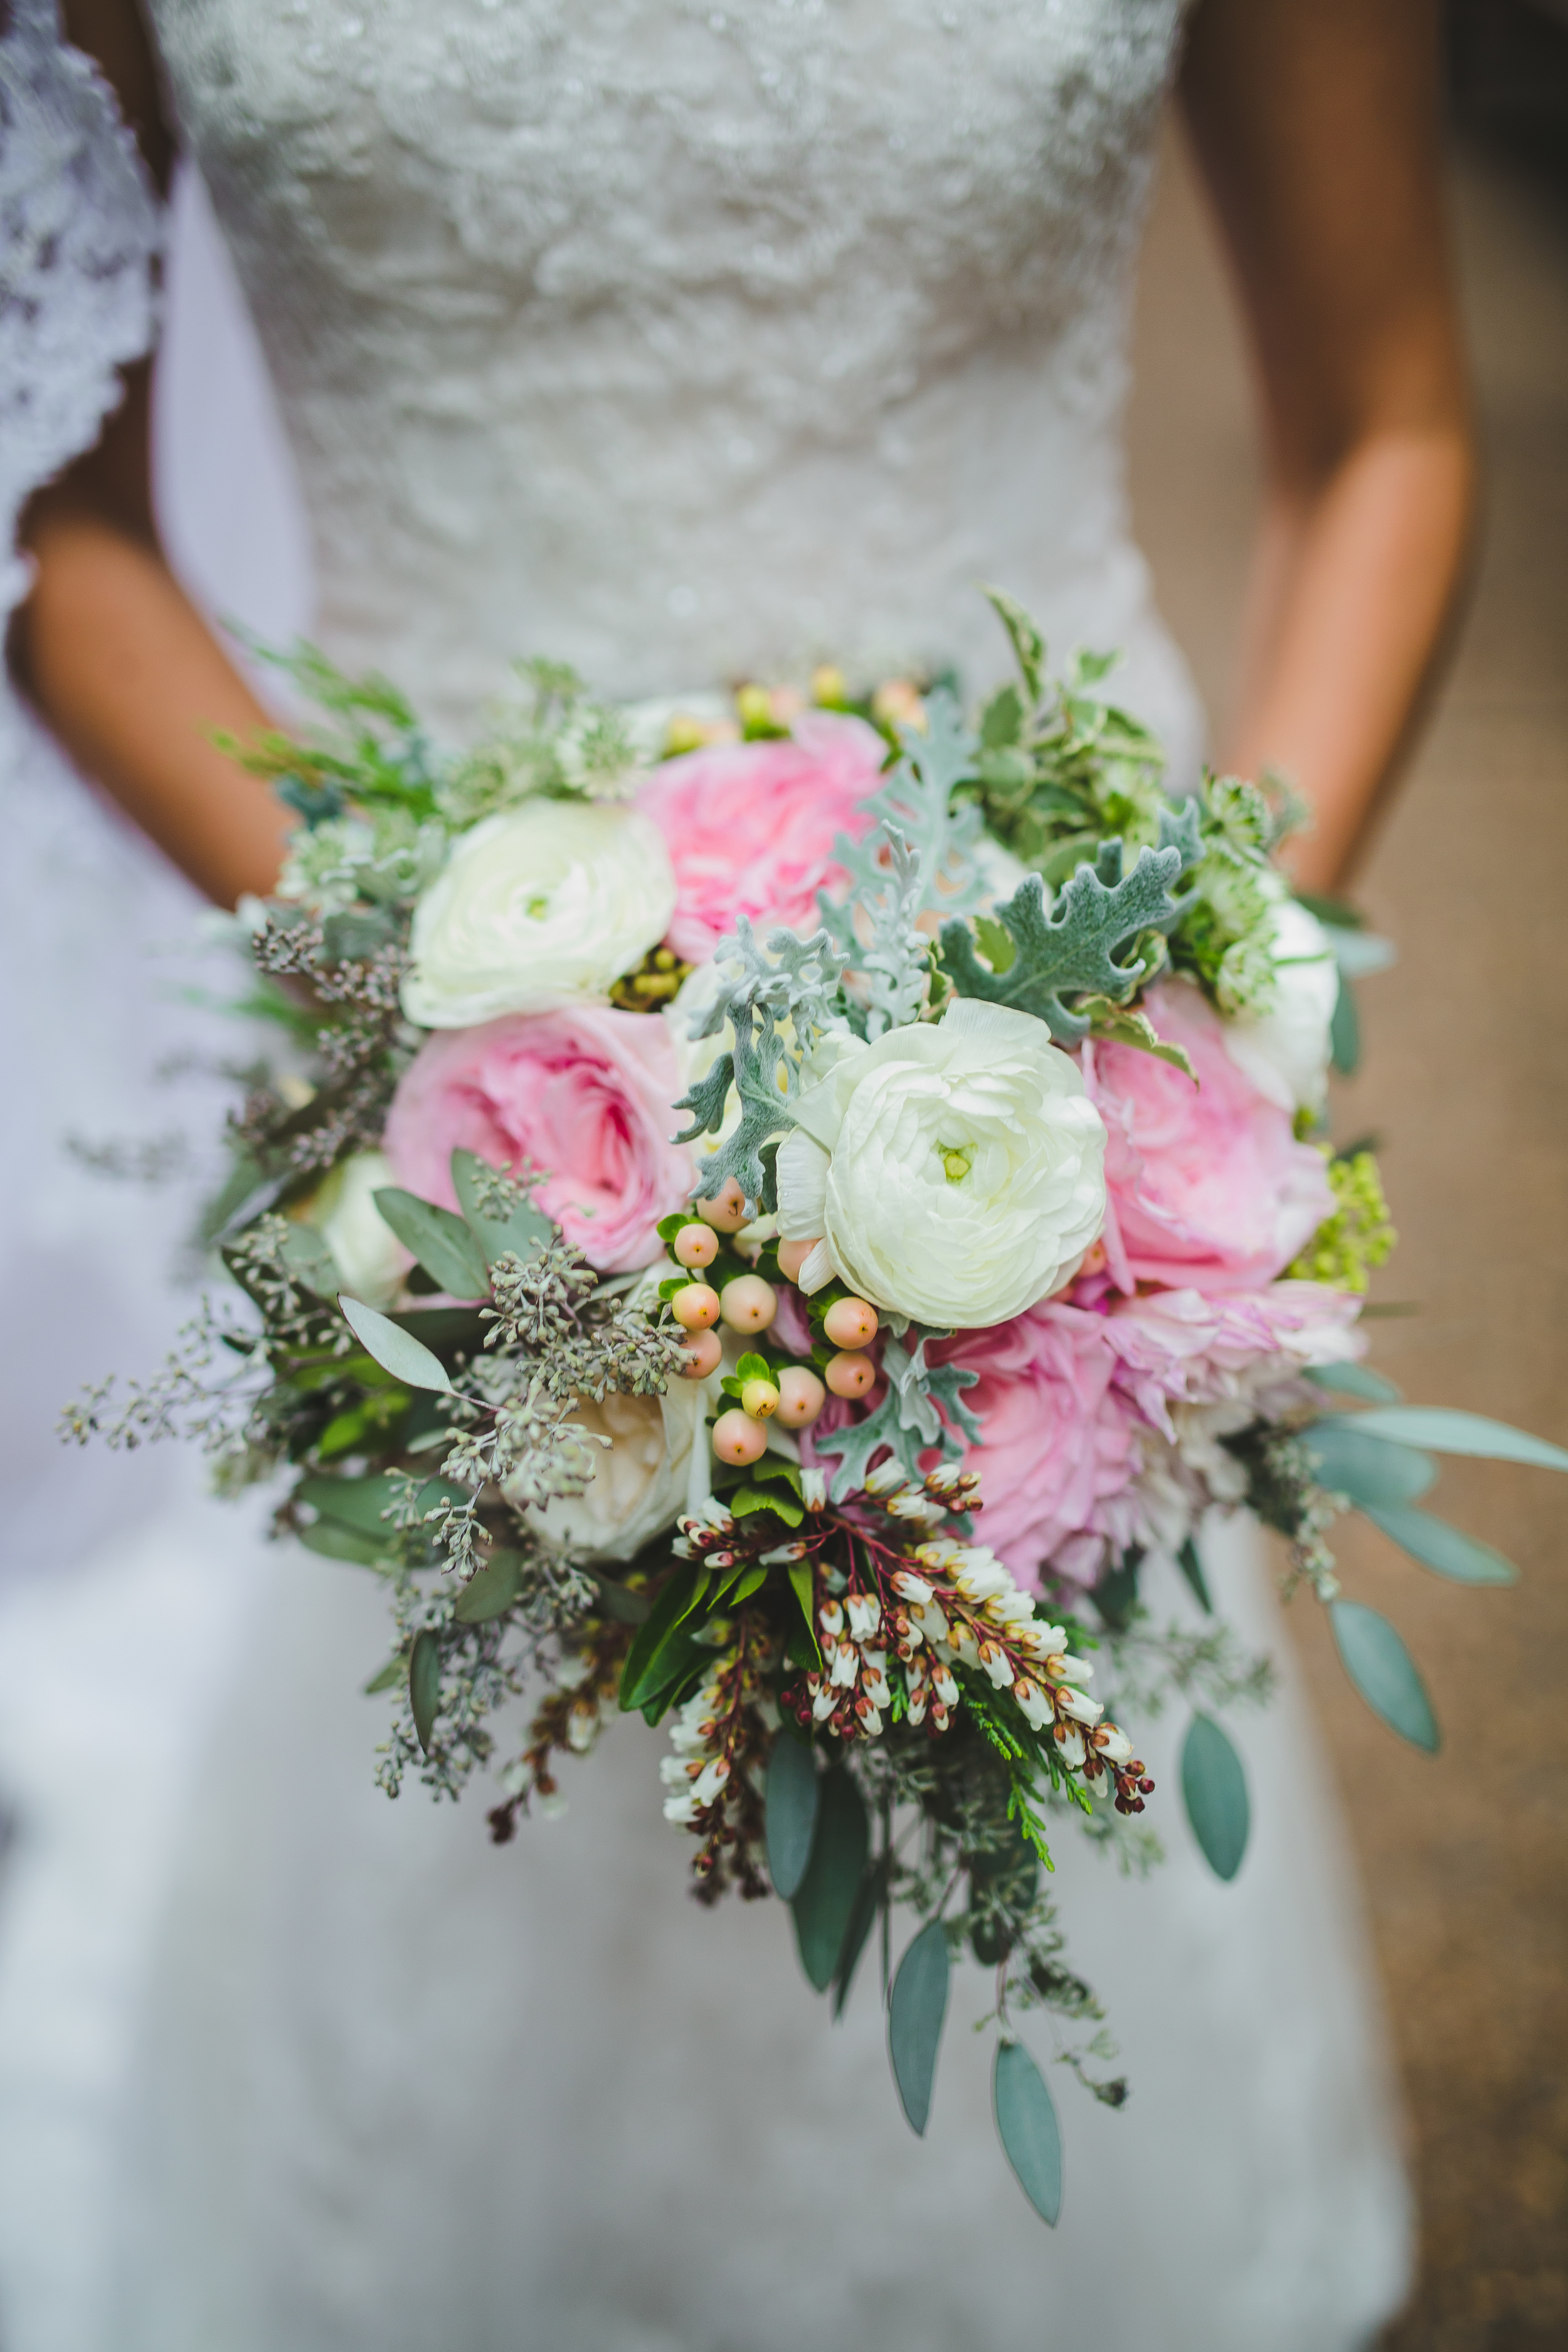 Whimsical garden bridal bouquet // Rosemary & Finch Floral Design